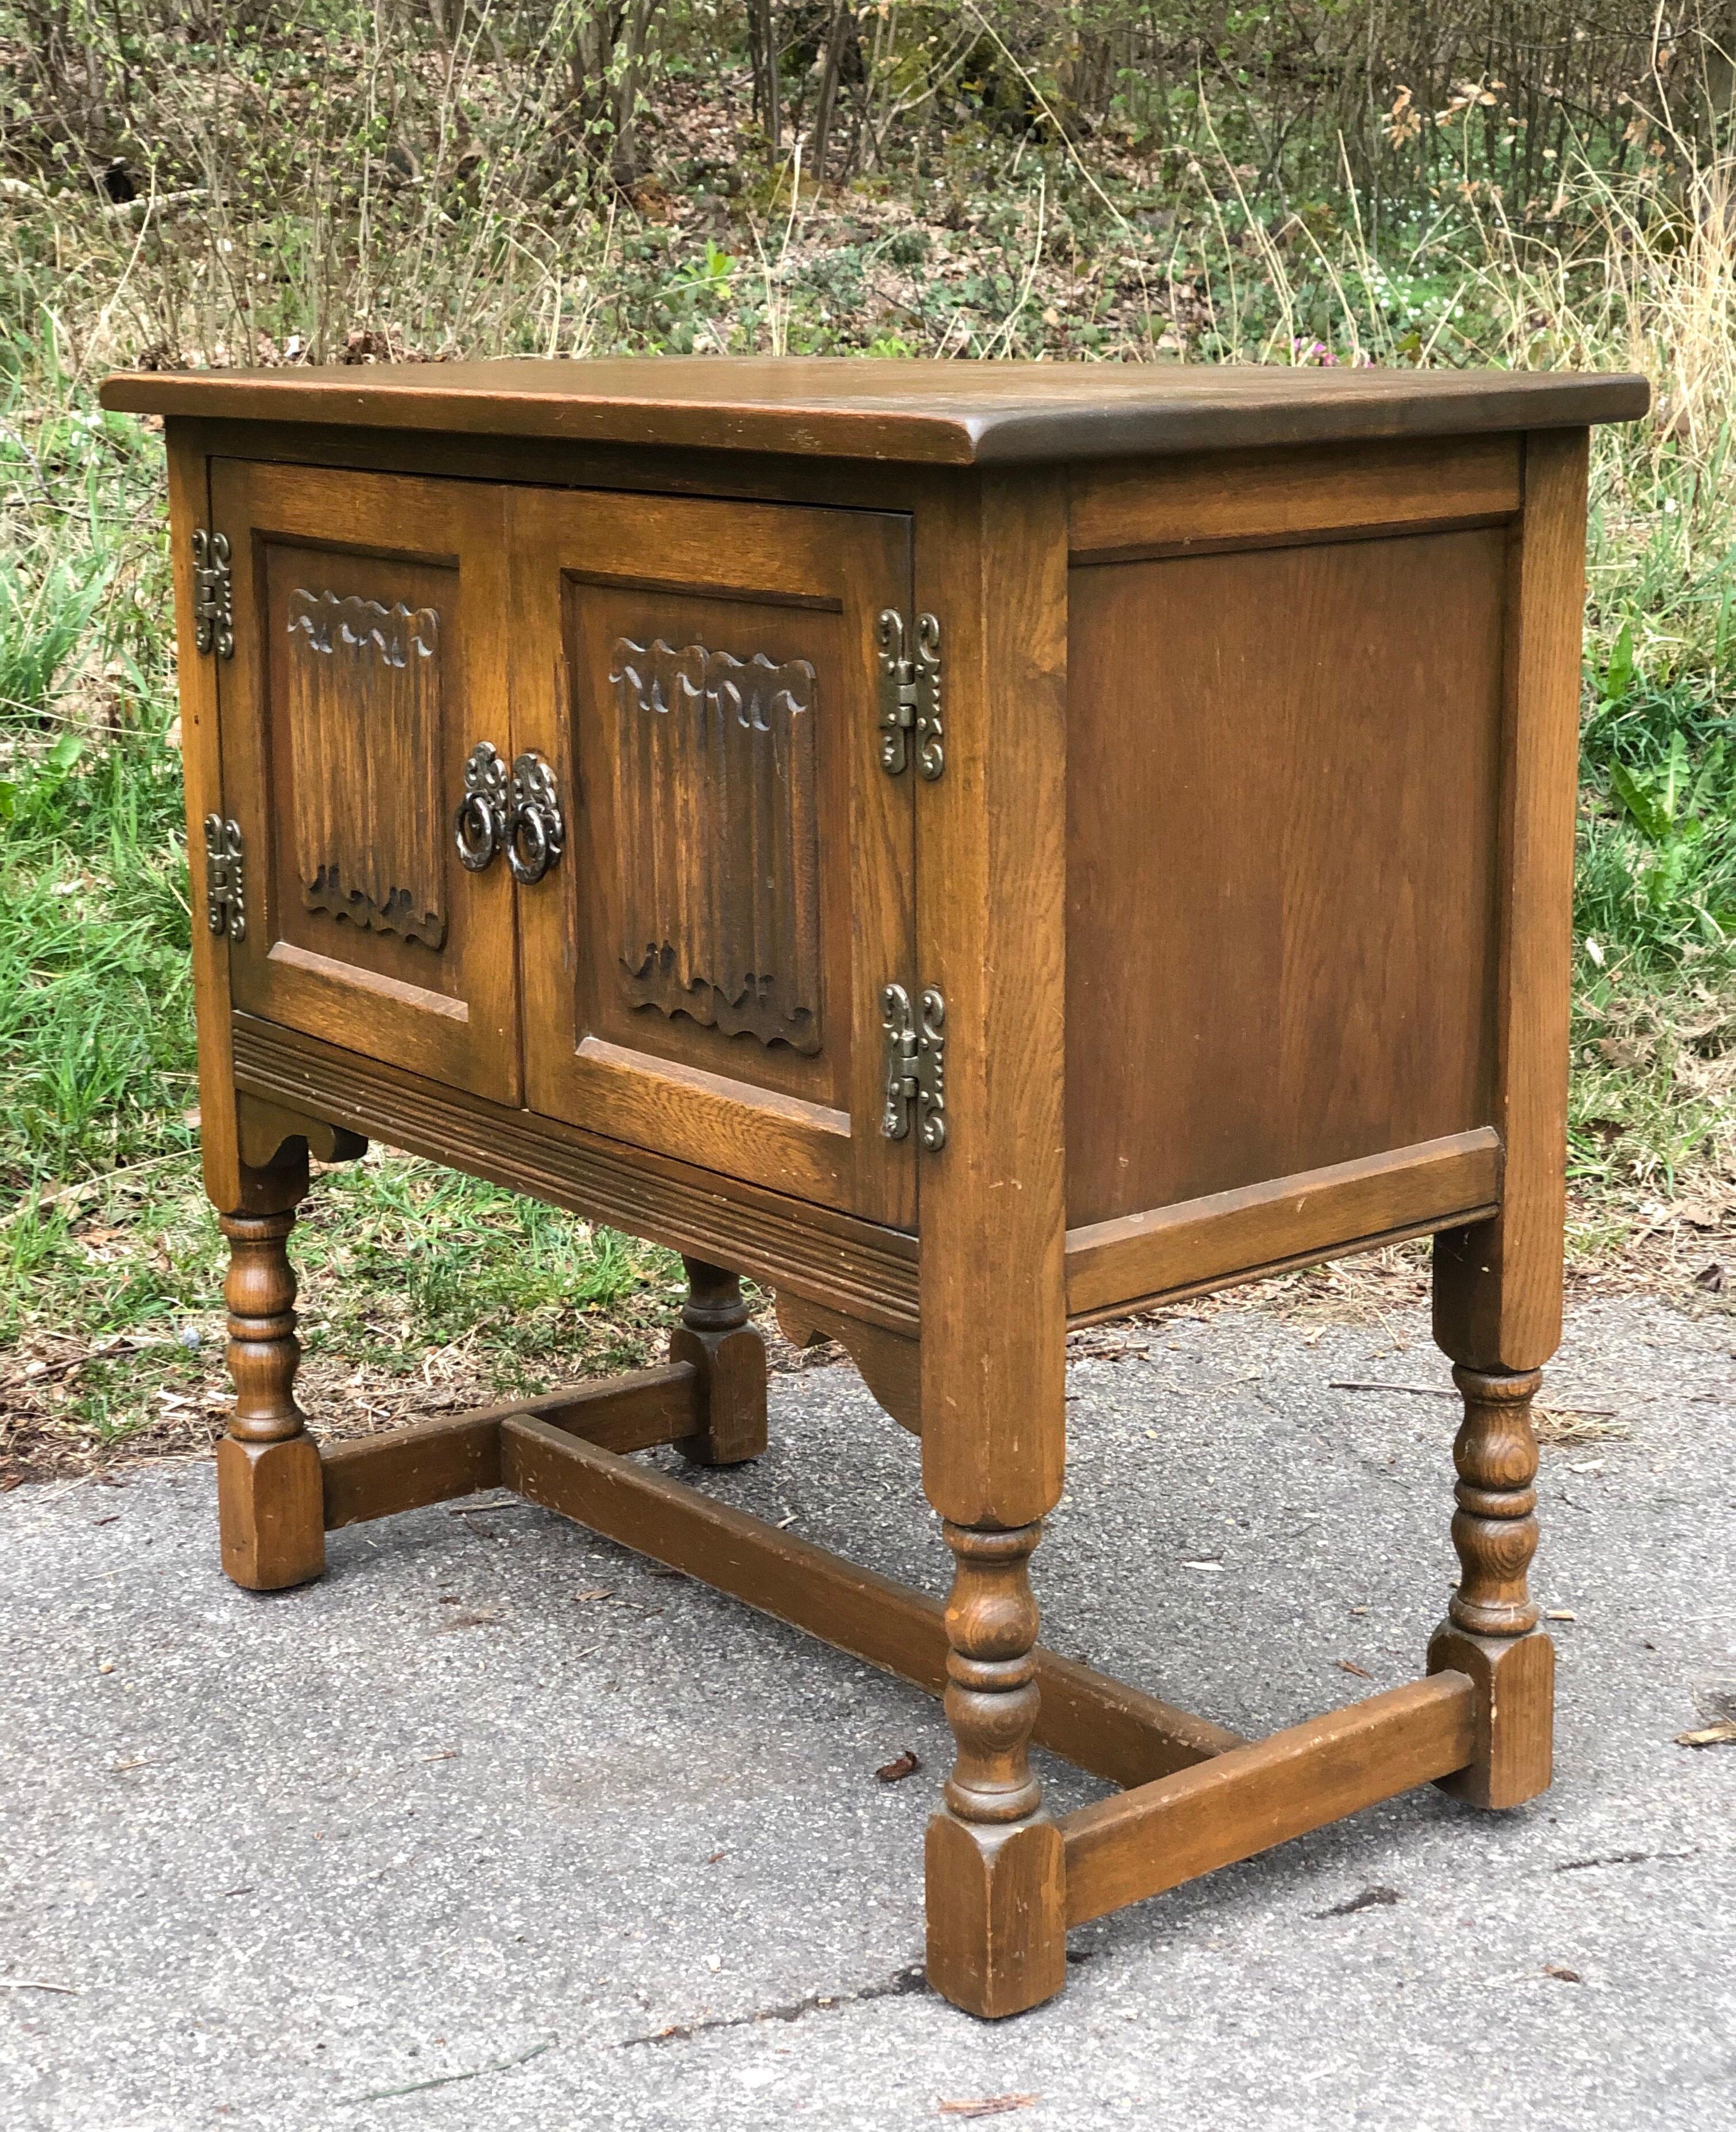 The design inspiration for Old Charm comes from the Tudor and Elizabethan era – a golden age in England’s history where cabinet-making skills and craftsmanship came to the fore. Today we still use traditional cabinetry techniques such as dovetailing